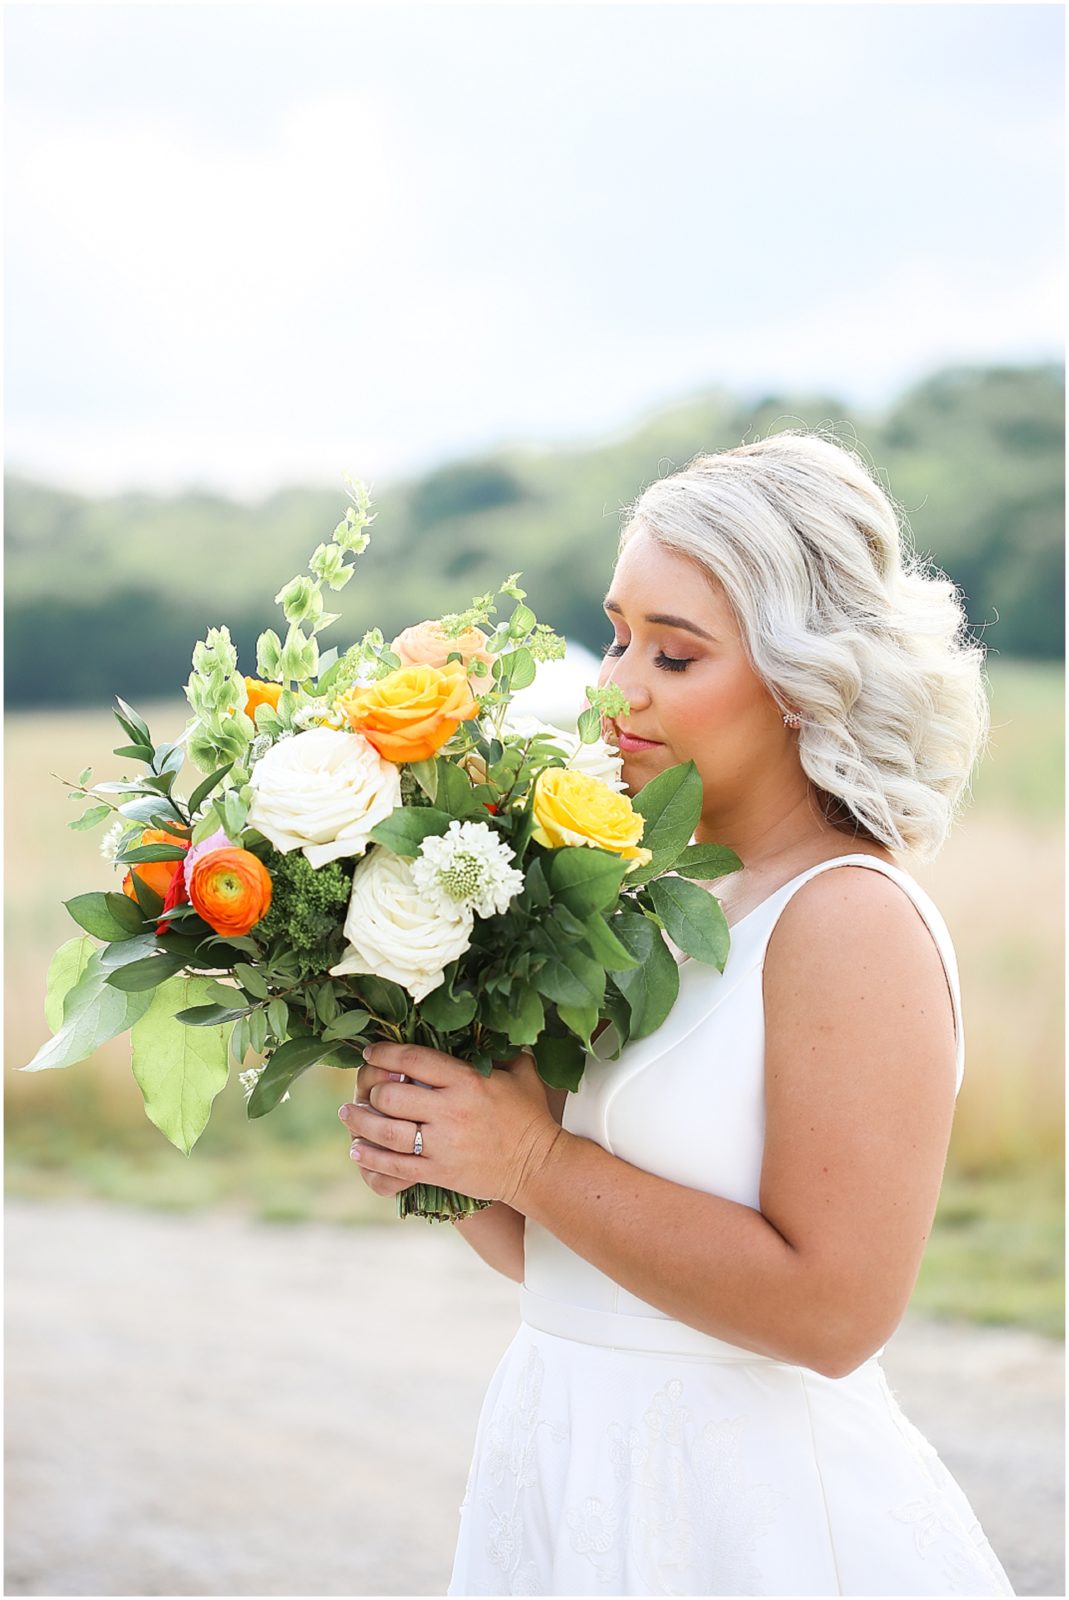 BRIDE SMELLING HER COLORFUL WEDDING BOUQUET FILLED WITH WHITE ORANGE AND YELLOW AT THE LEGACY AT GREEN HILLS FOR A WEDDING IN KANSAS CITY THAT WAS PHOTOGRAPHED BY MARIAM SAIFAN PHOTOGRAPHY - BEAUTIFUL WEDDING BOUQUET - KC WEDDING FLORIST + PHOTOGRAPHER